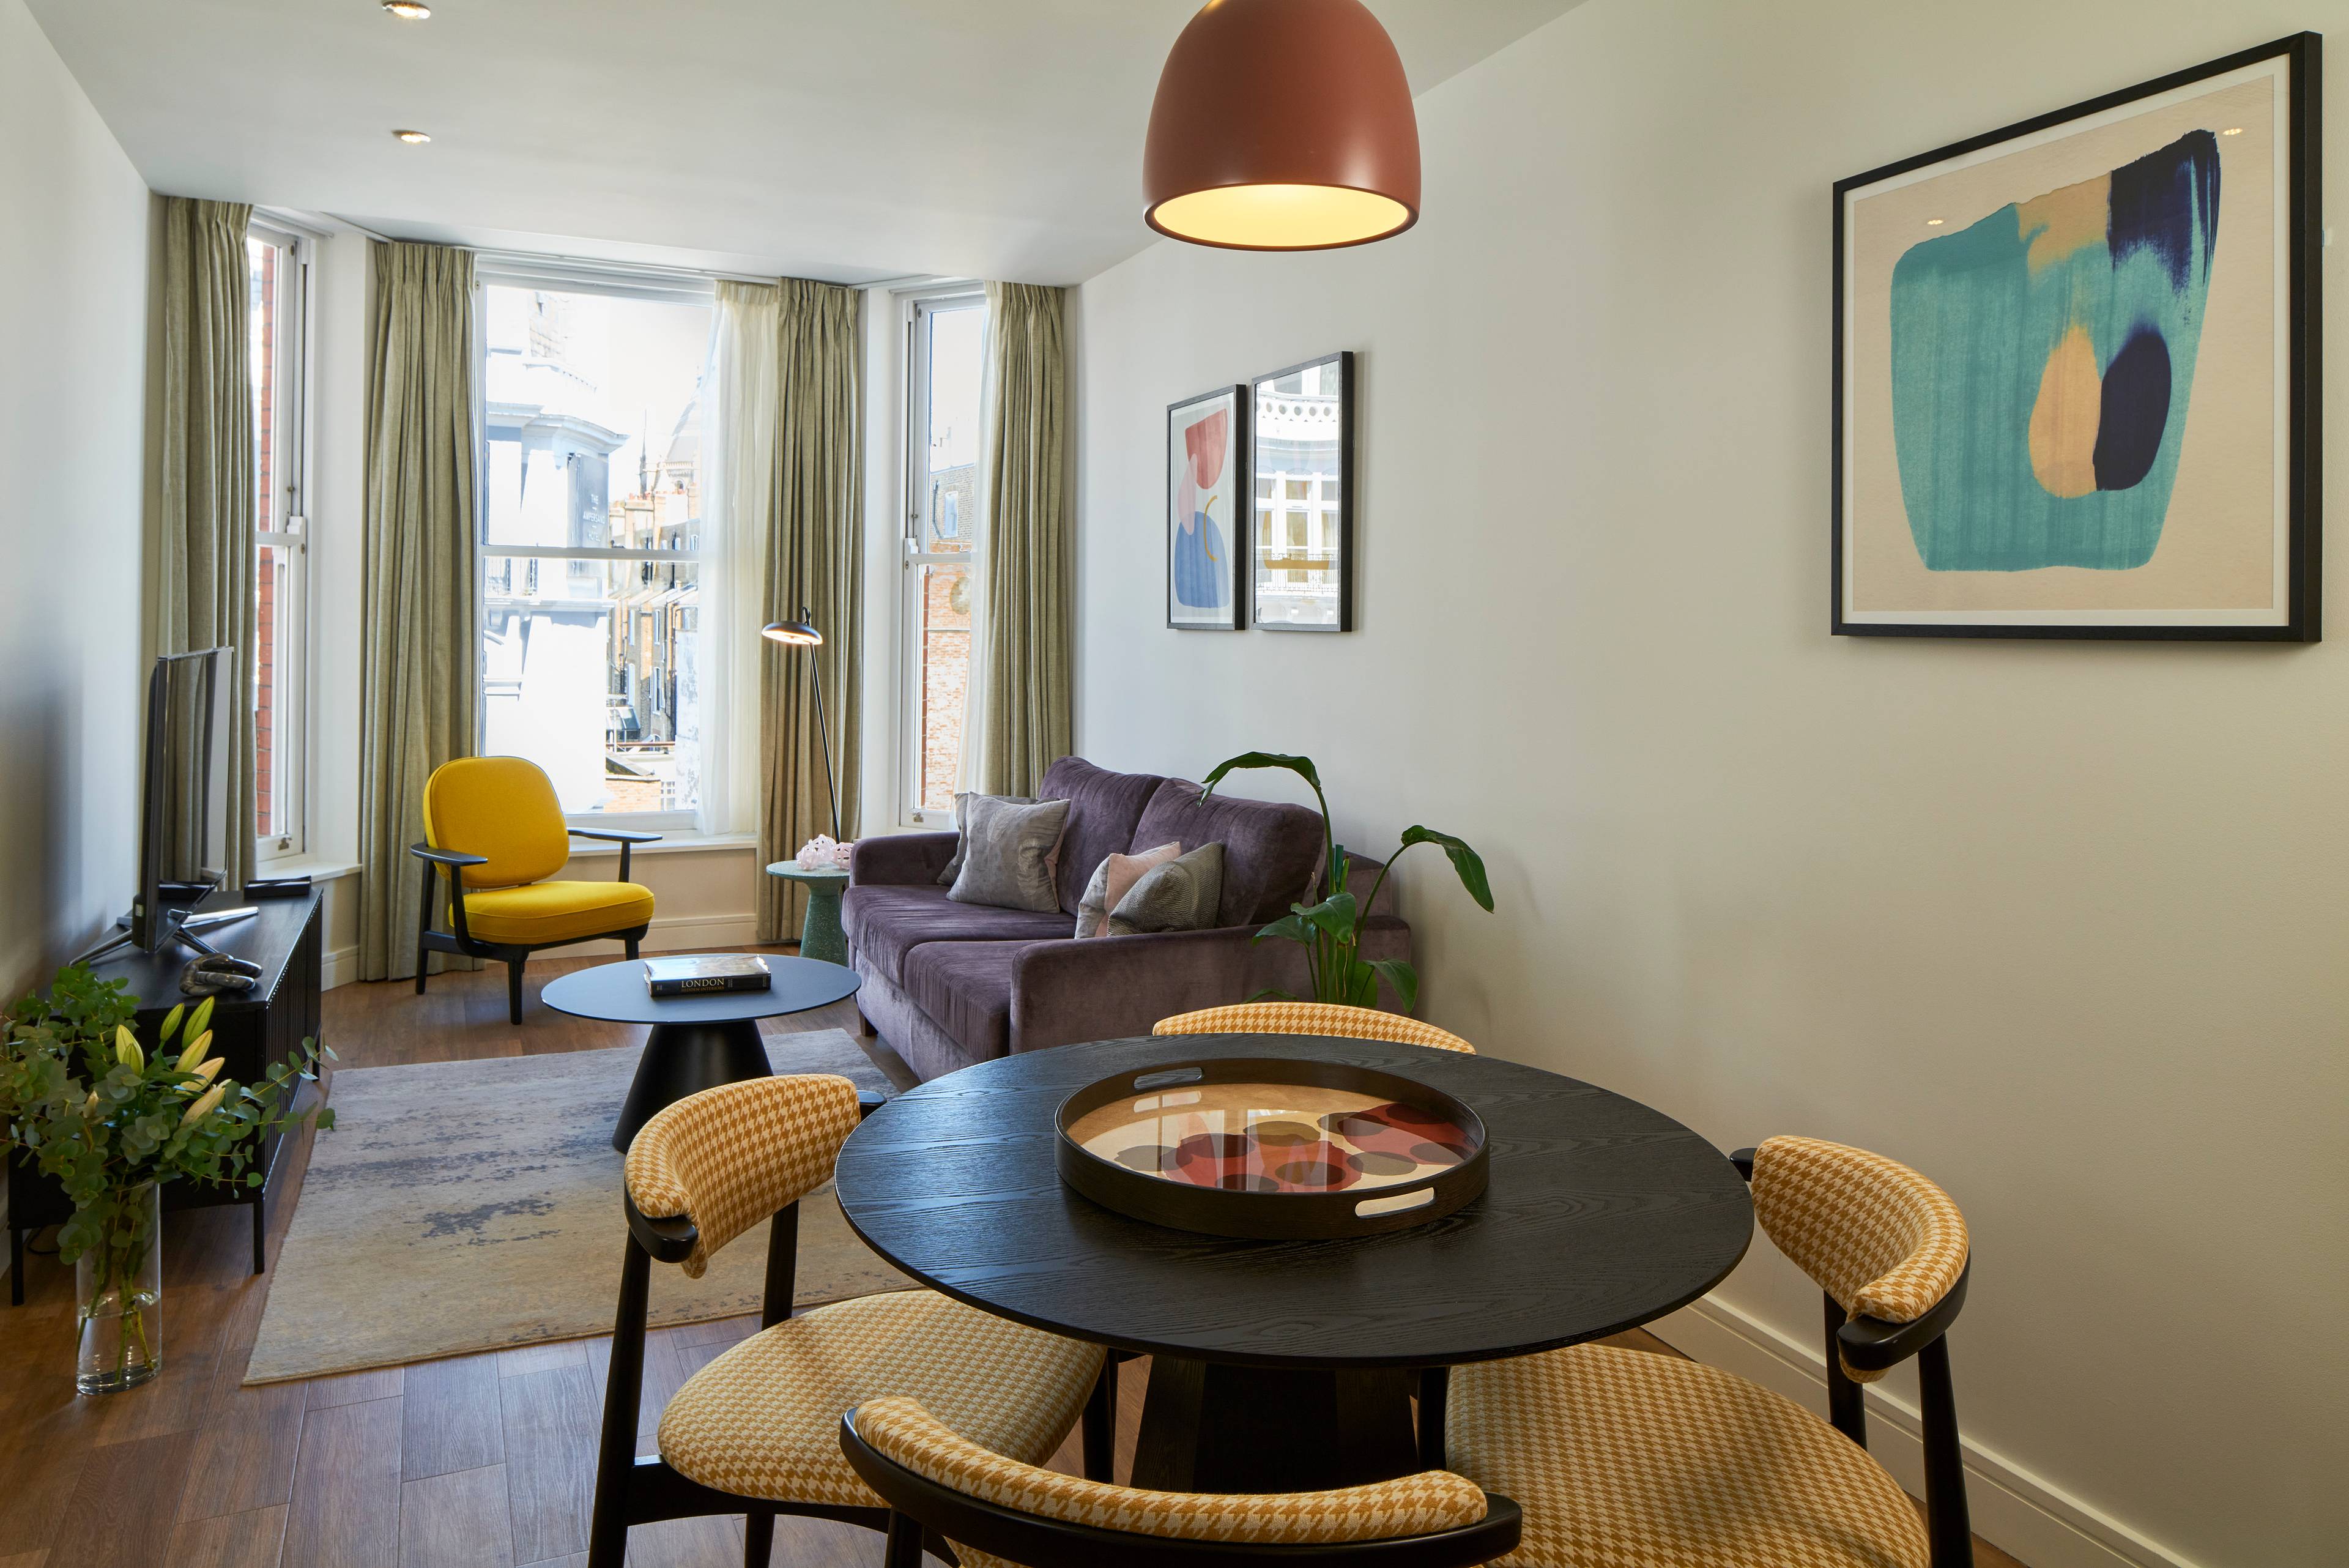 Two-Bedroom Serviced Apartment with Premium Amenities in Trendy South Kensington